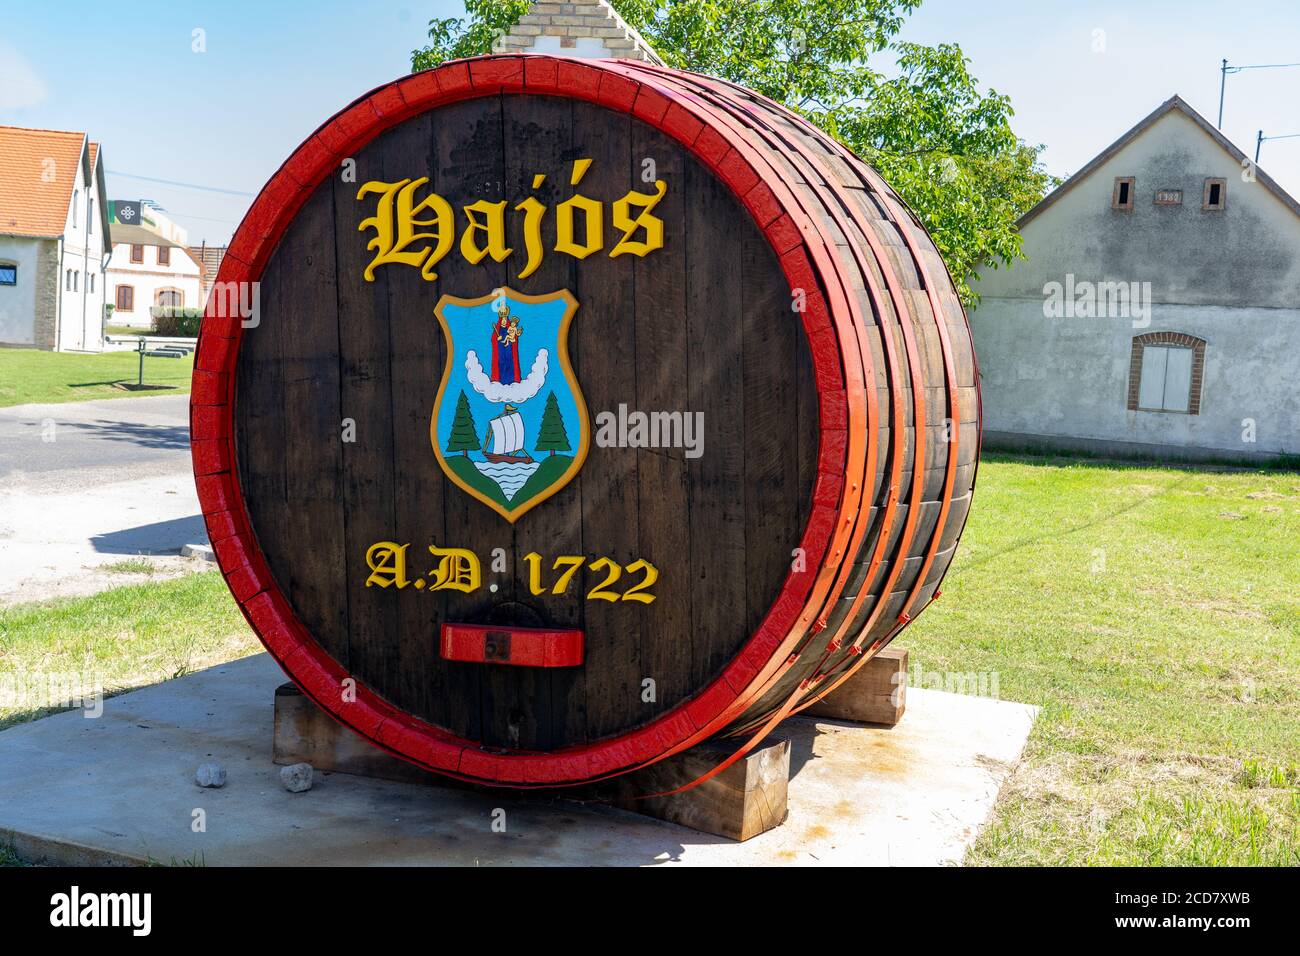 Hajos, Hungary - 08.21.2020: Barrel with village sign at the entrance of the museal colorful cellar village of Hajos with 1200 little cellars and many Stock Photo